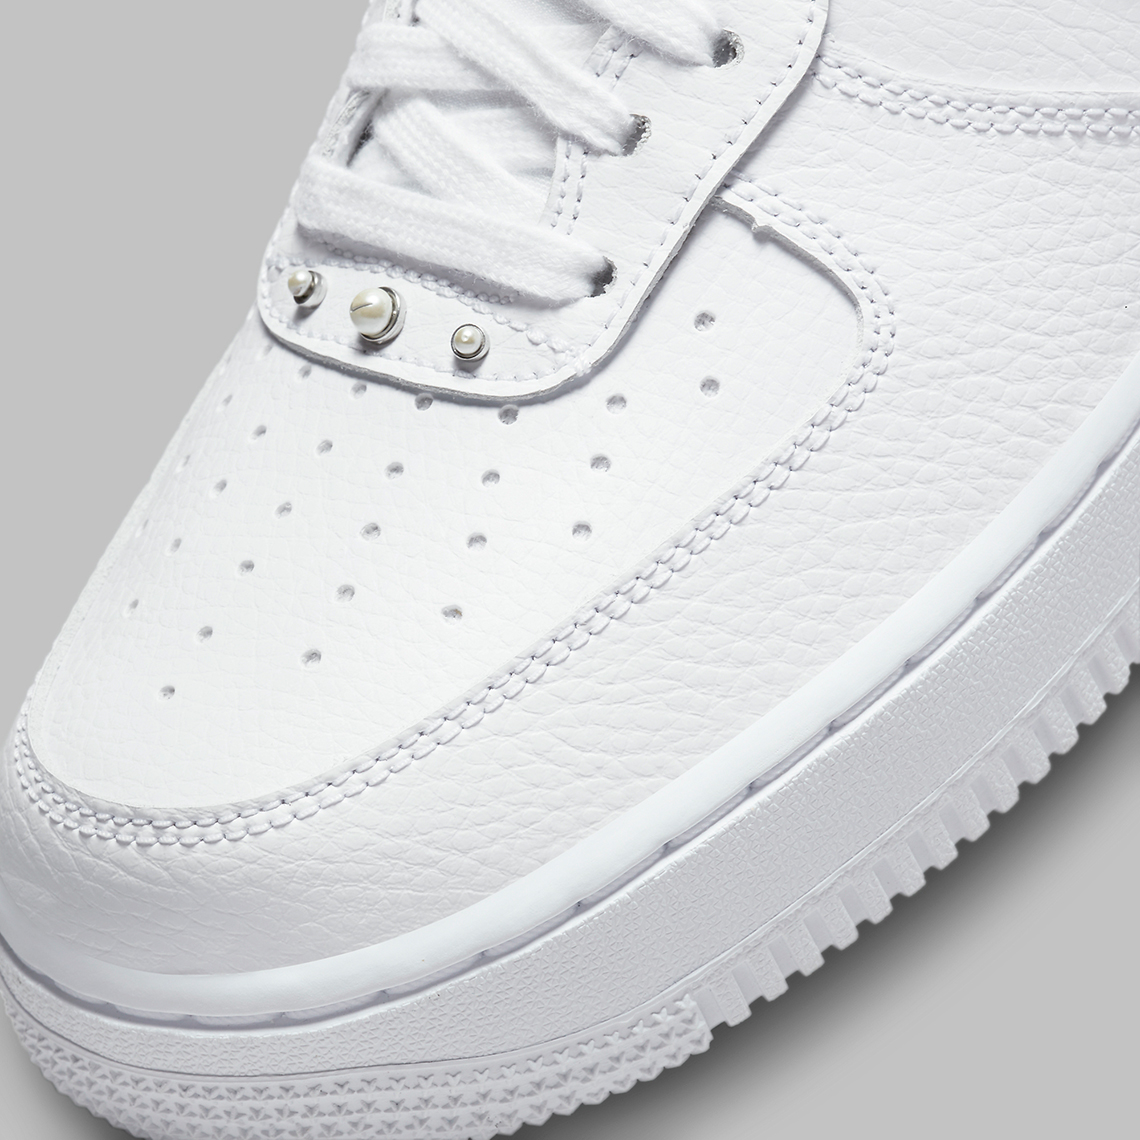 Nike Air Force 1 Low Pearls Dq0231 100 Release Date 2